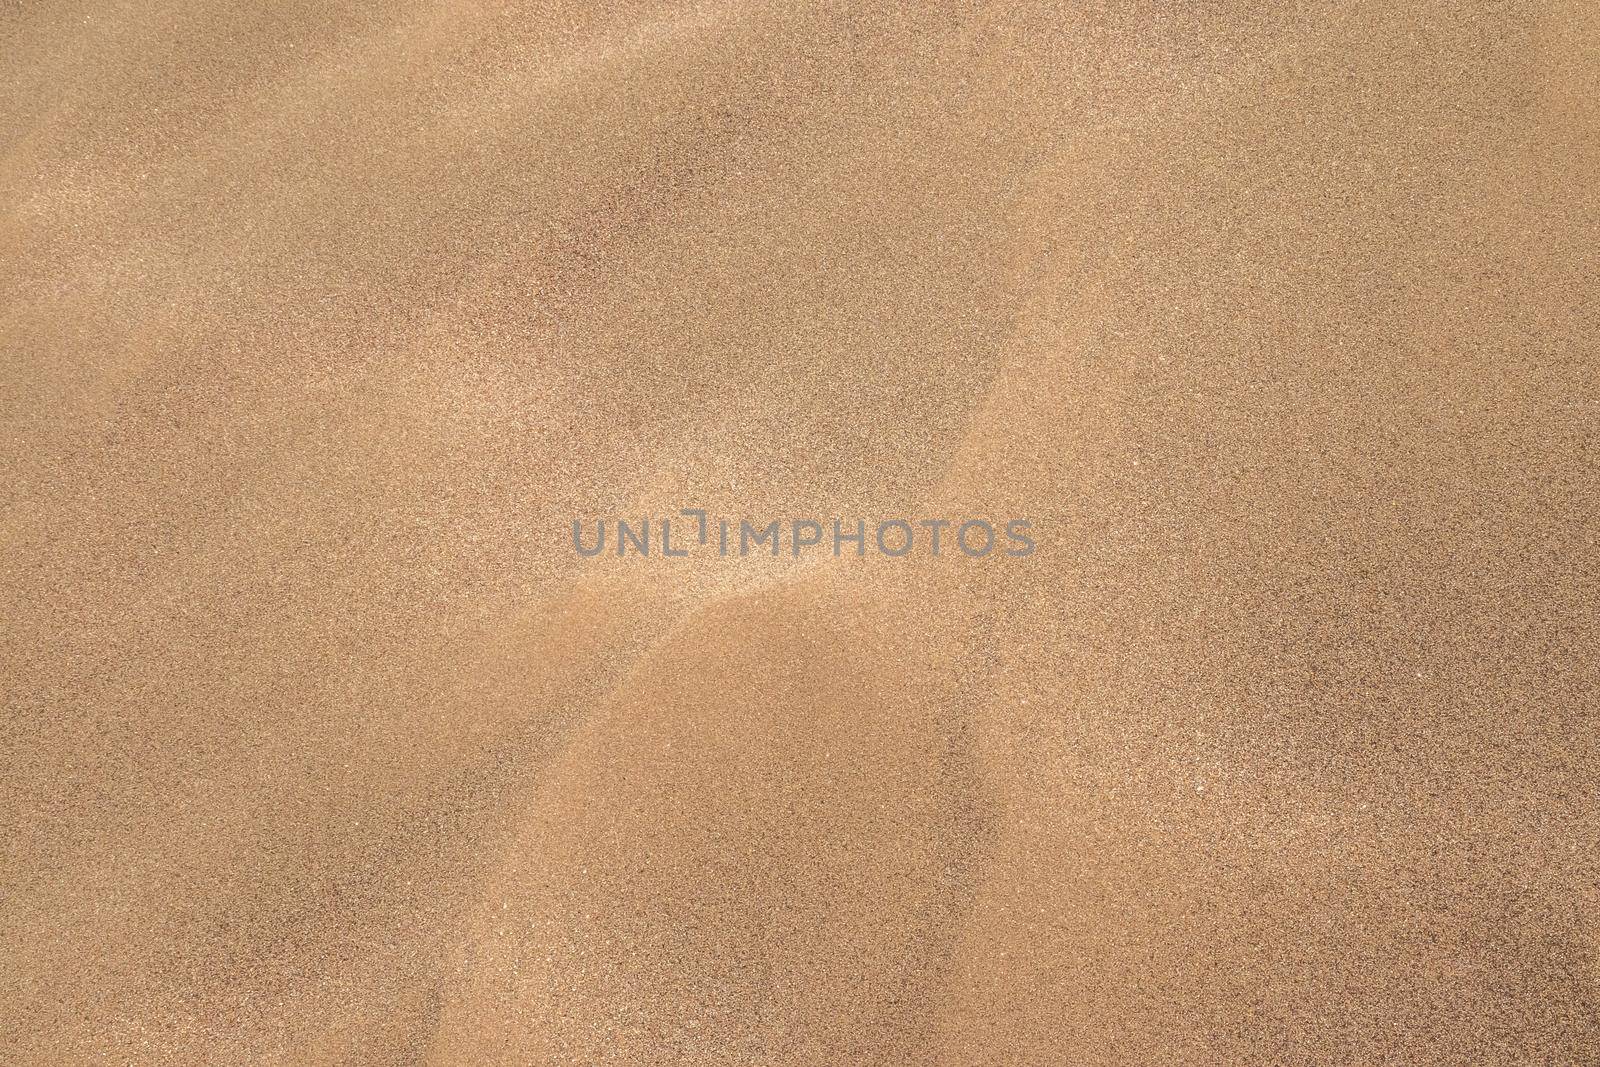 Full frame shot of sand area on the beach by suththisumdeang